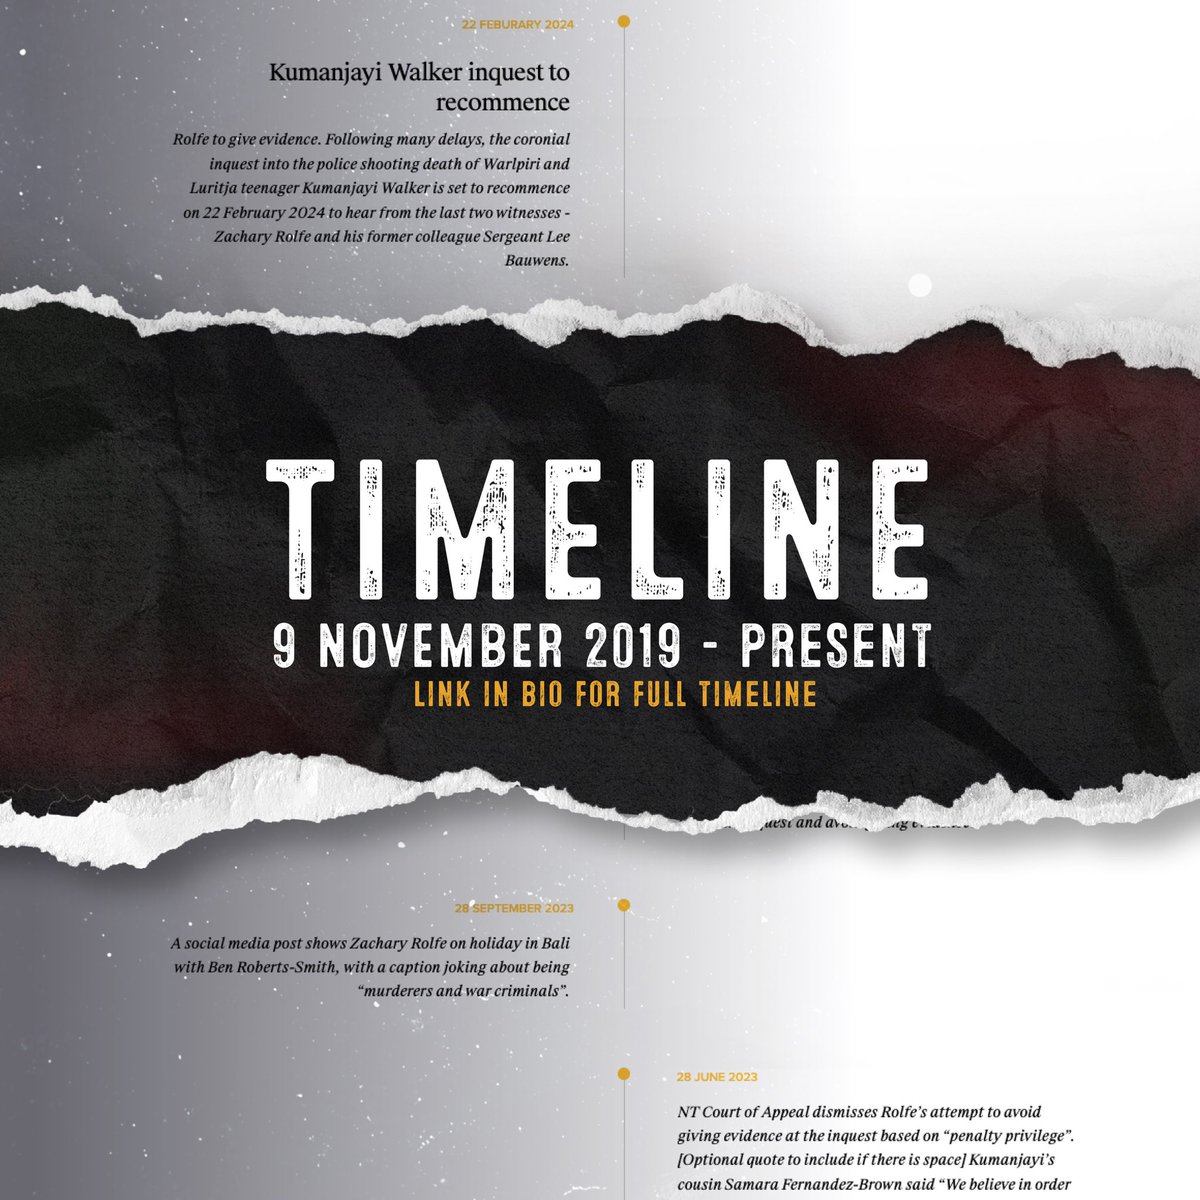 We have been on this journey since 9 November 2019, if you are interested in understanding what this journey has looked like you can view the full timeline here: hrlc.org.au/timeline-justi…